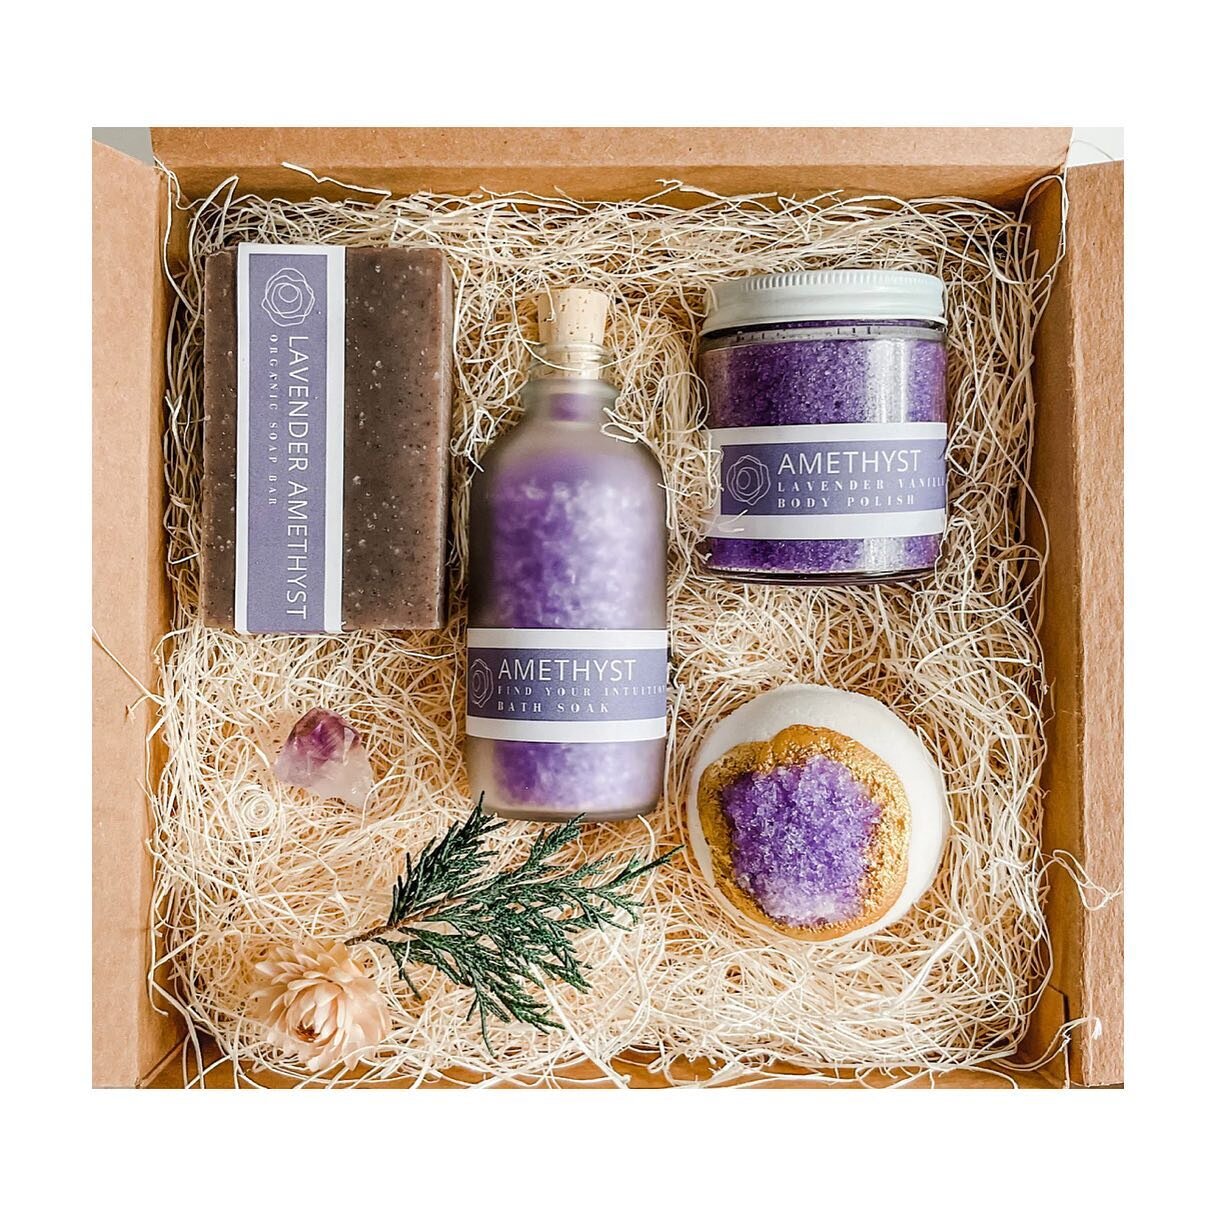 Swooning over this Amethyst bath gift set. Lavender soap, Epsom salts, body polish, gemstone bath bomb &amp; an amethyst crystal. Truly clean &amp; natural ingredients &amp; truly beautiful. $68